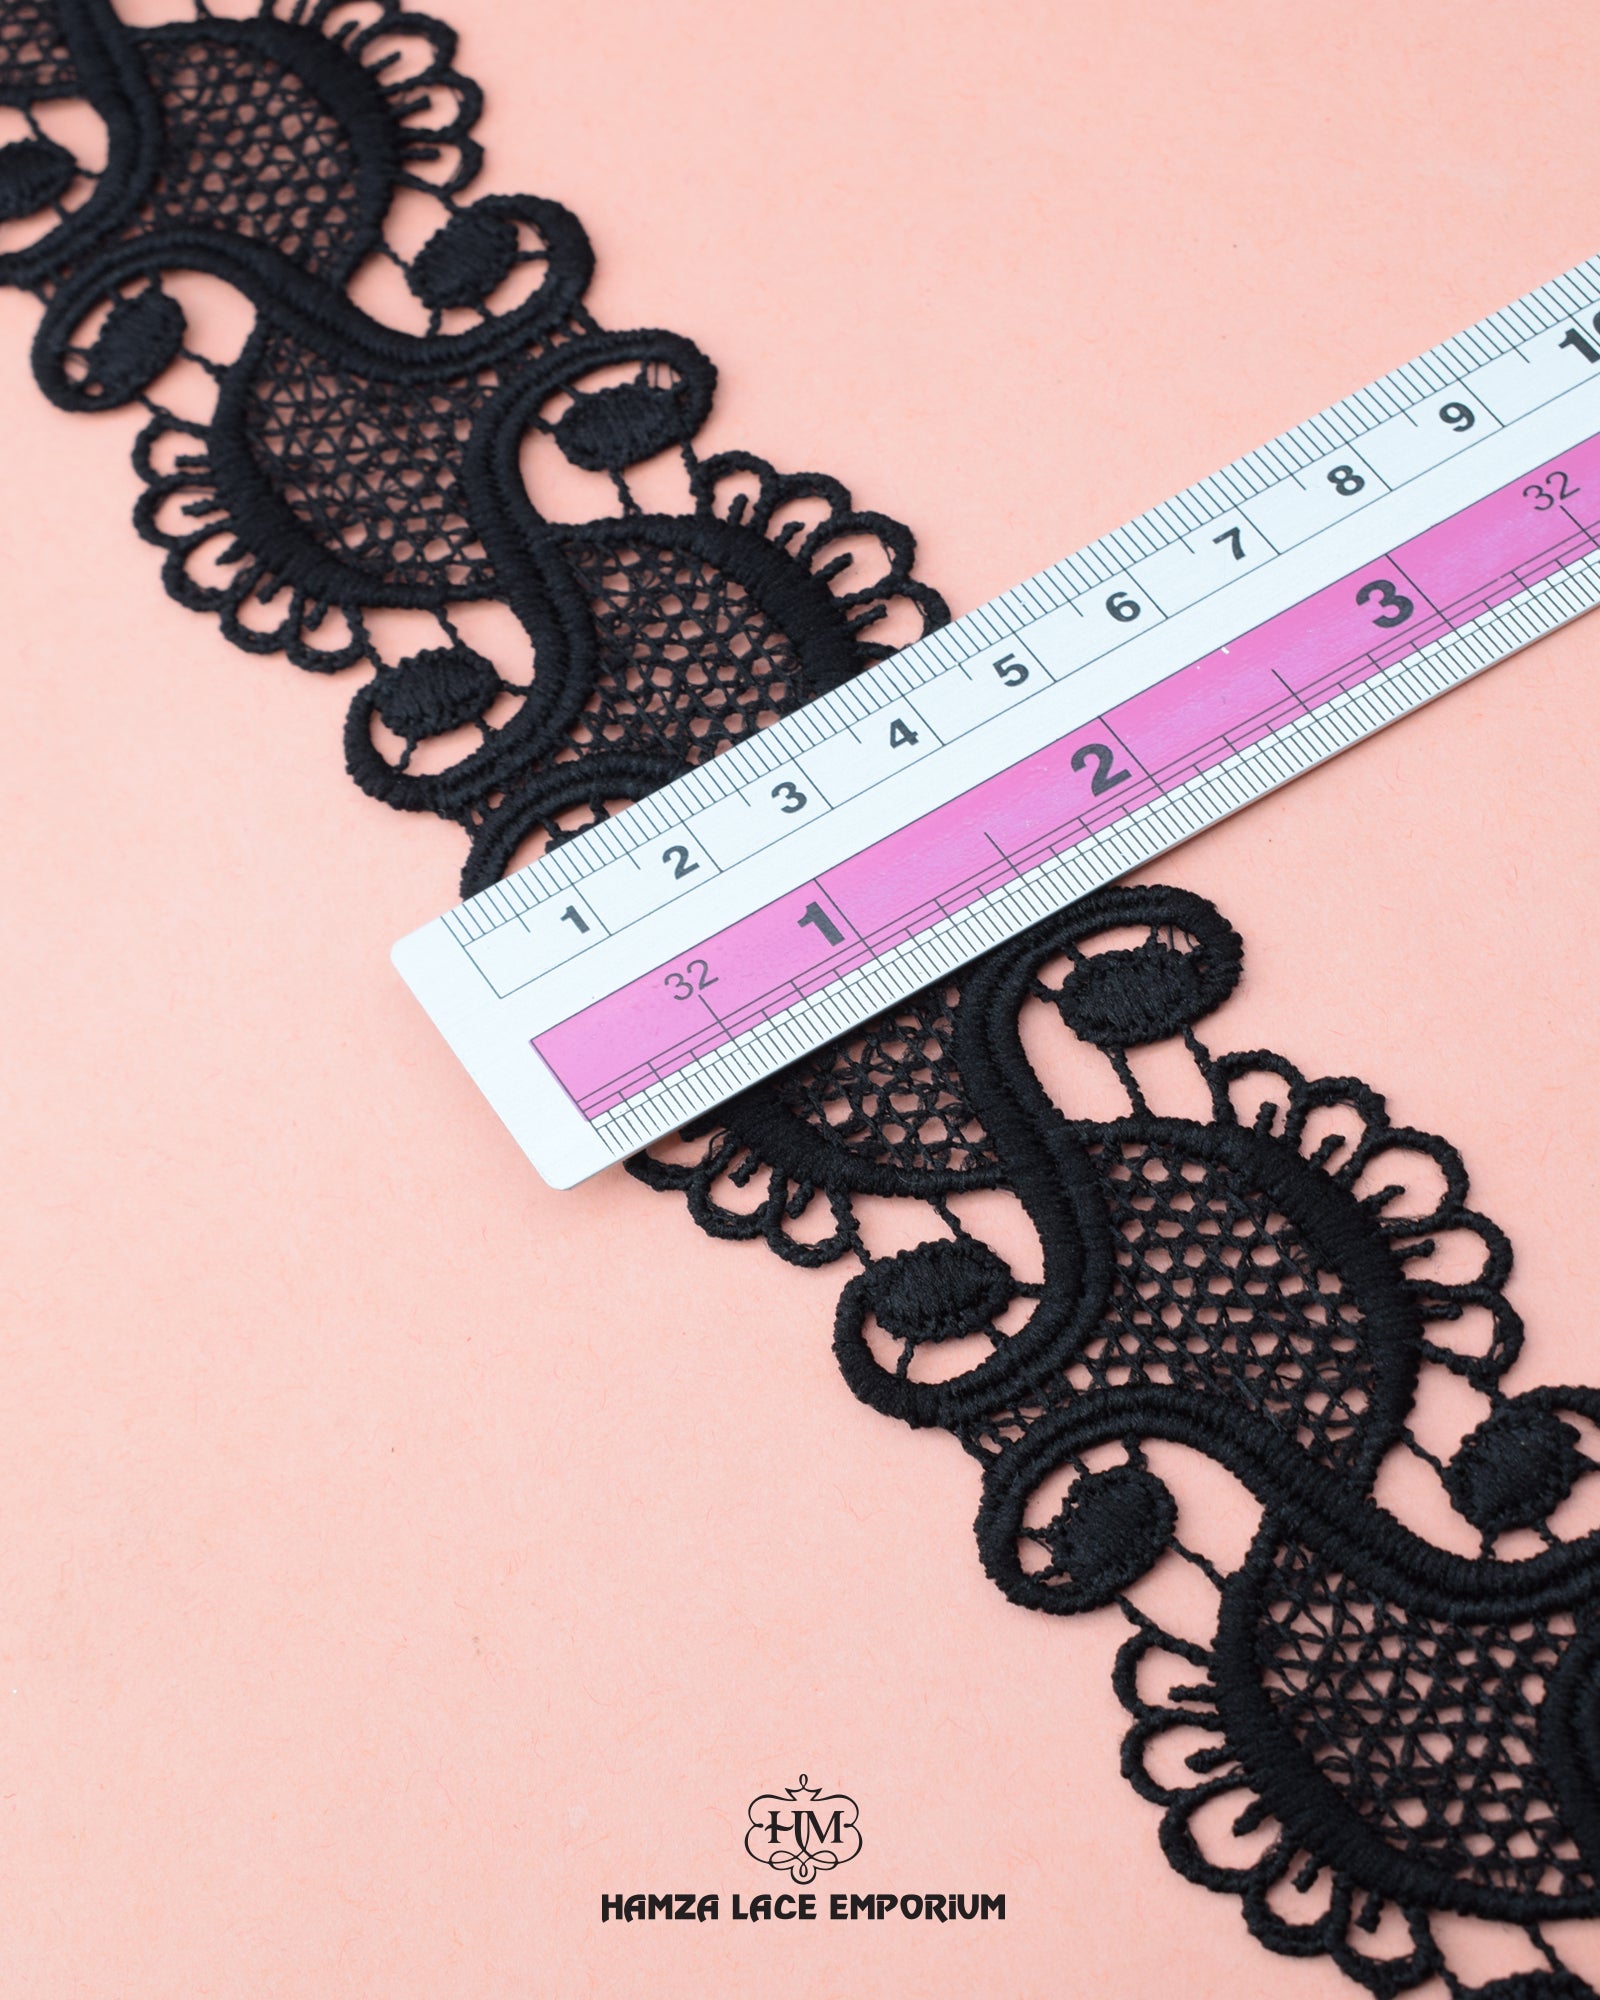 Center Filling Lace 23635 showcased alongside a ruler, revealing a width of one inch.